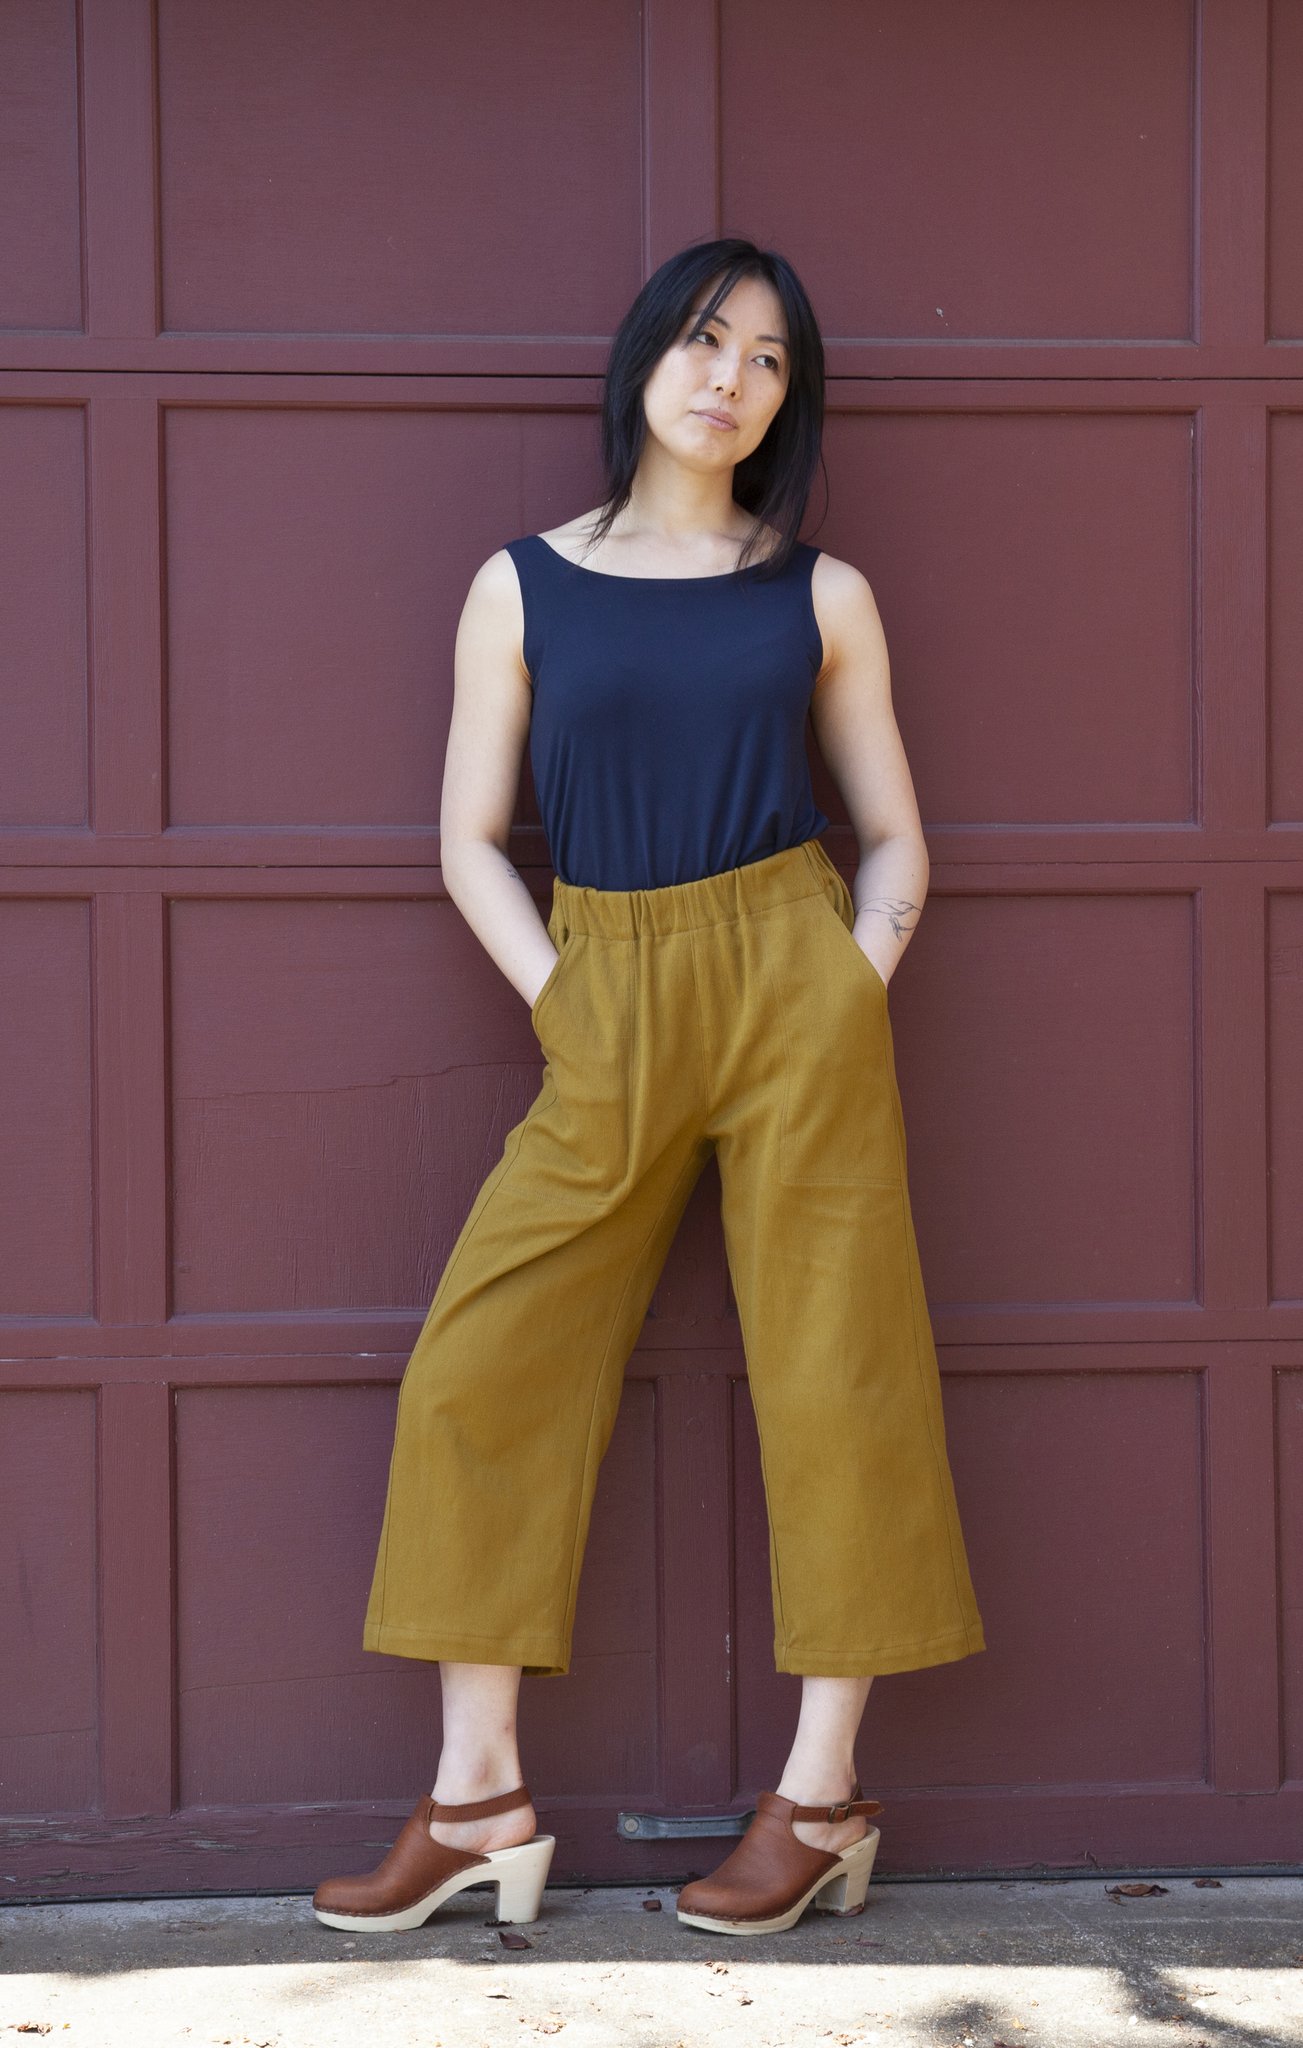 Woman wearing the Free Range Slacks sewing pattern from Sew House Seven on The Fold Line. A trouser pattern made in cotton/linen blends, rayon/linen blends, denim, tencel twill, cotton poplin or gabardine fabrics, featuring a straight cropped leg, high waist with elastic, front slash pockets and relaxed fit.